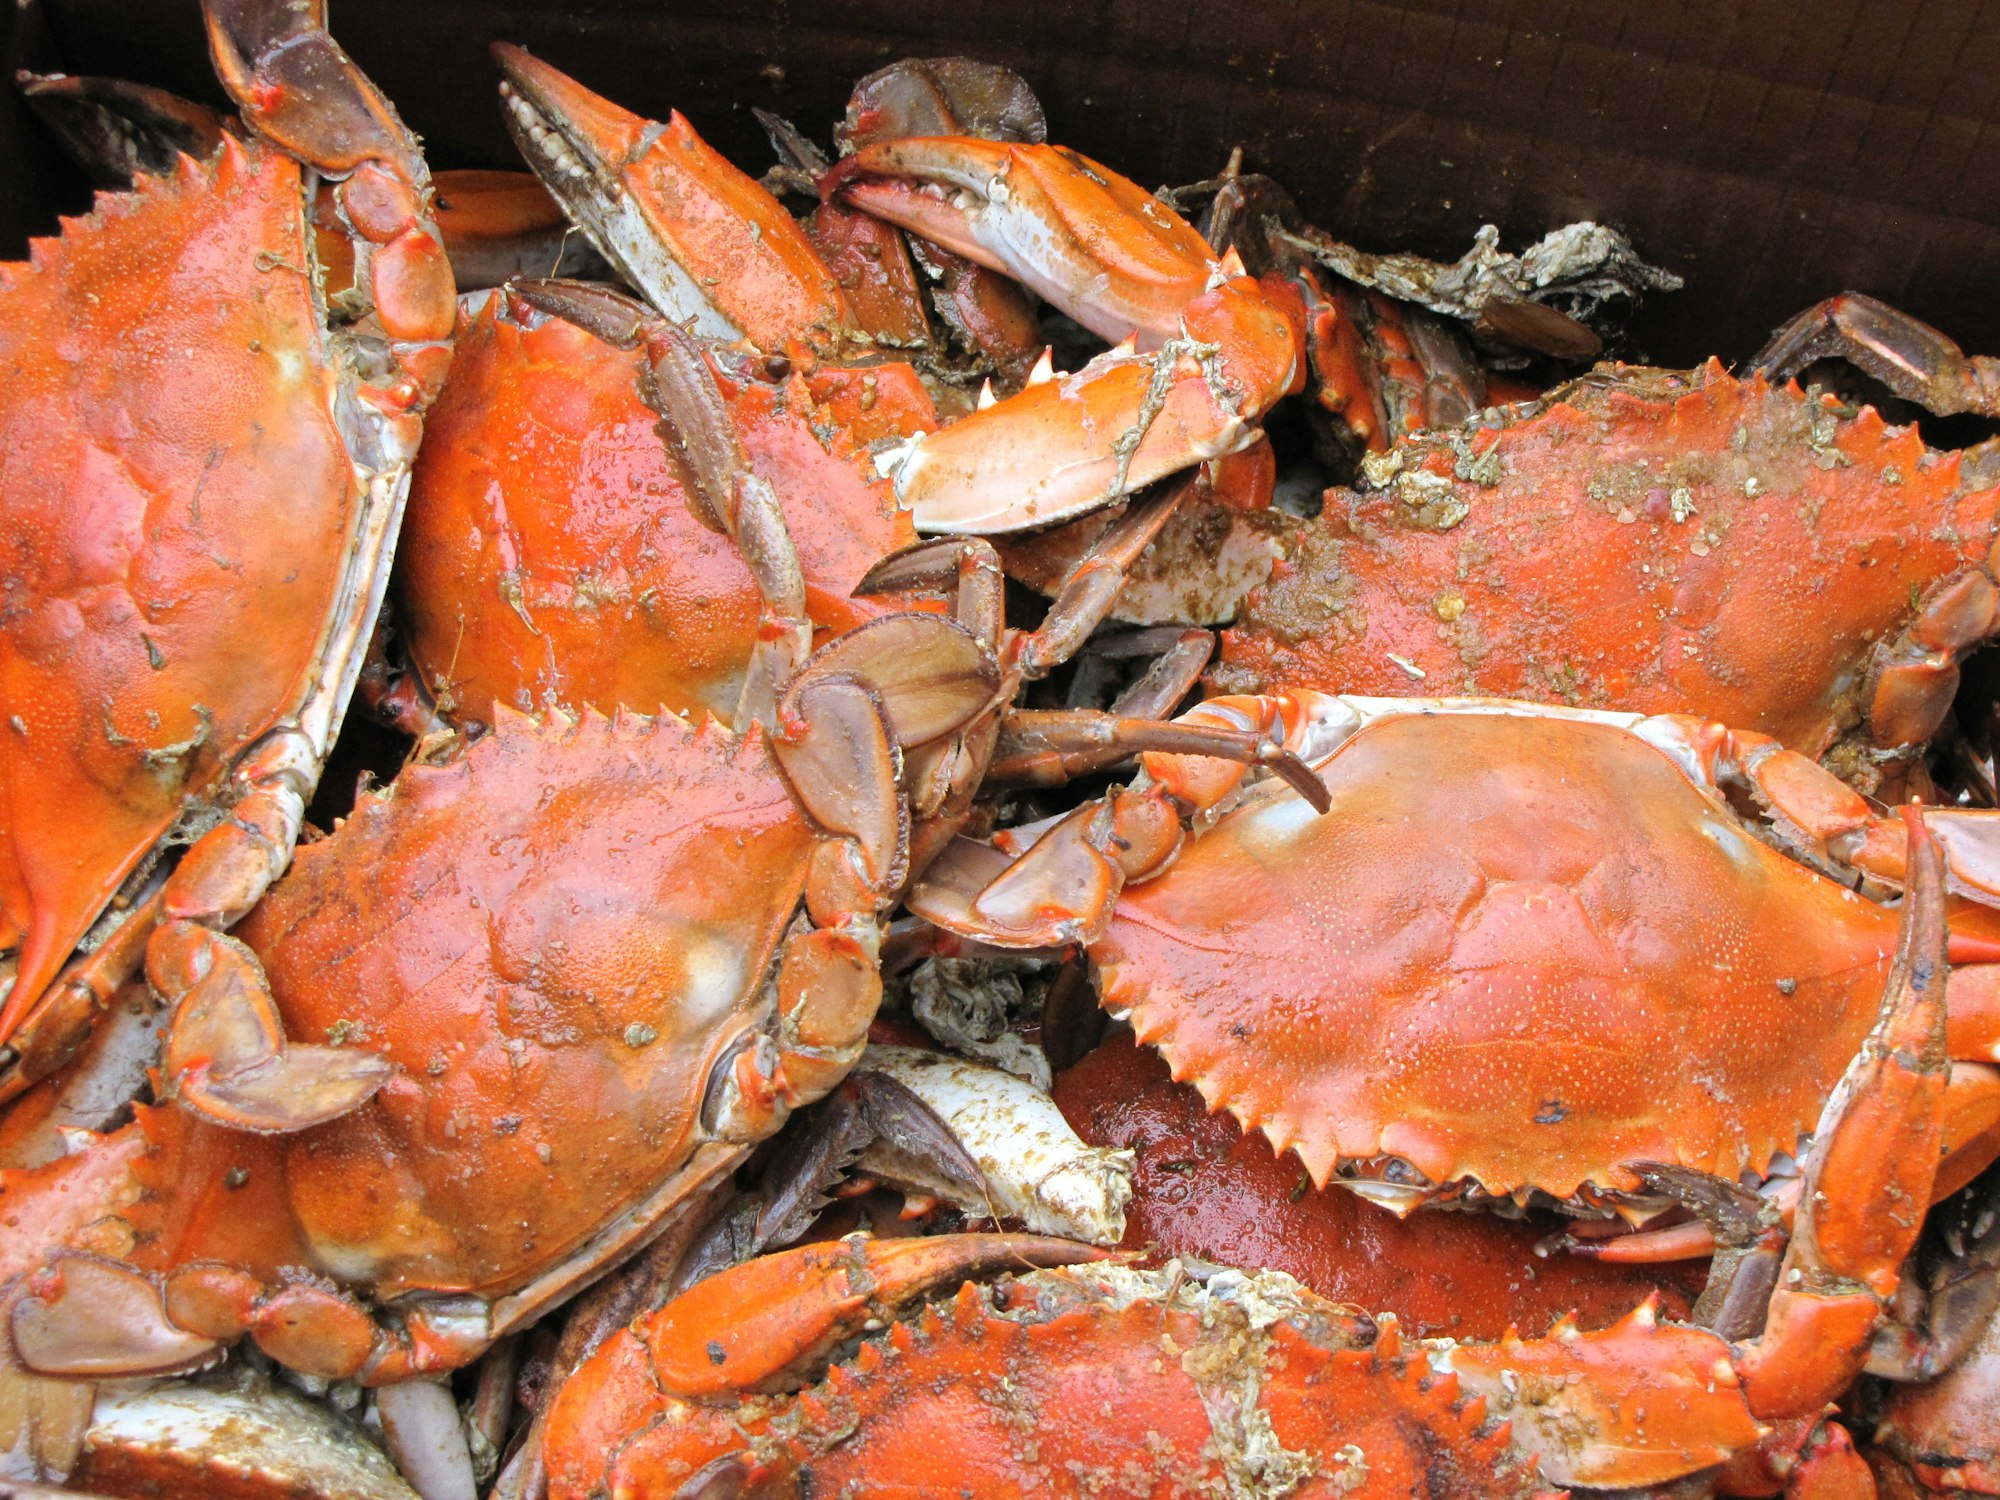 Weekly Market Update: "Don't Be the Crab"